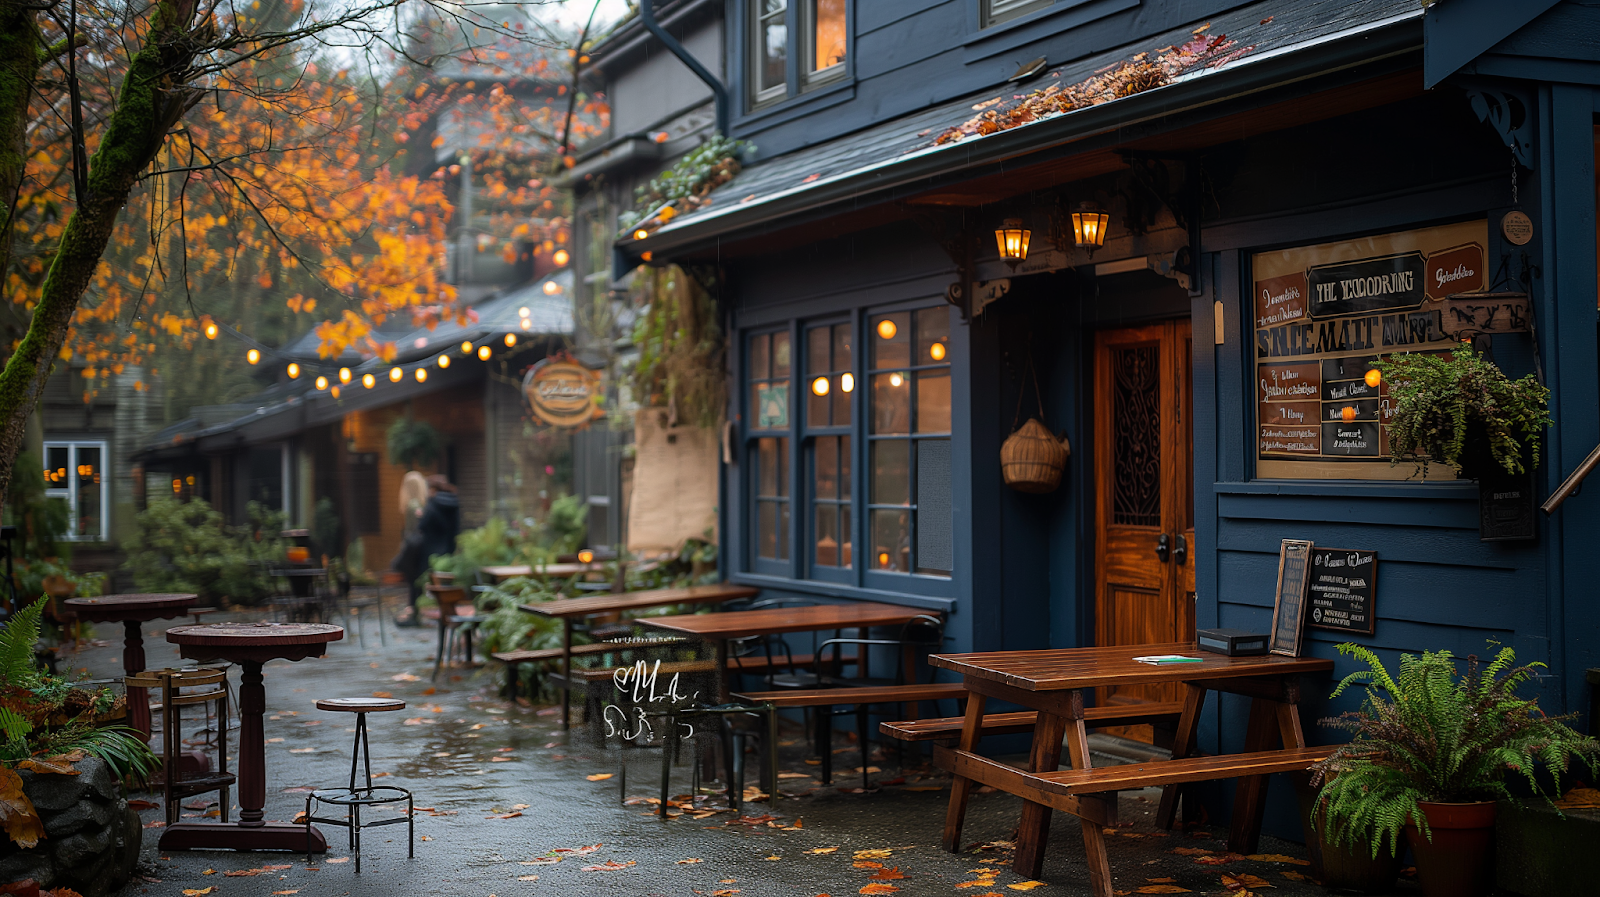 A quaint street café in Gastown, nestled among historic buildings, inviting passersby with its warm ambiance.